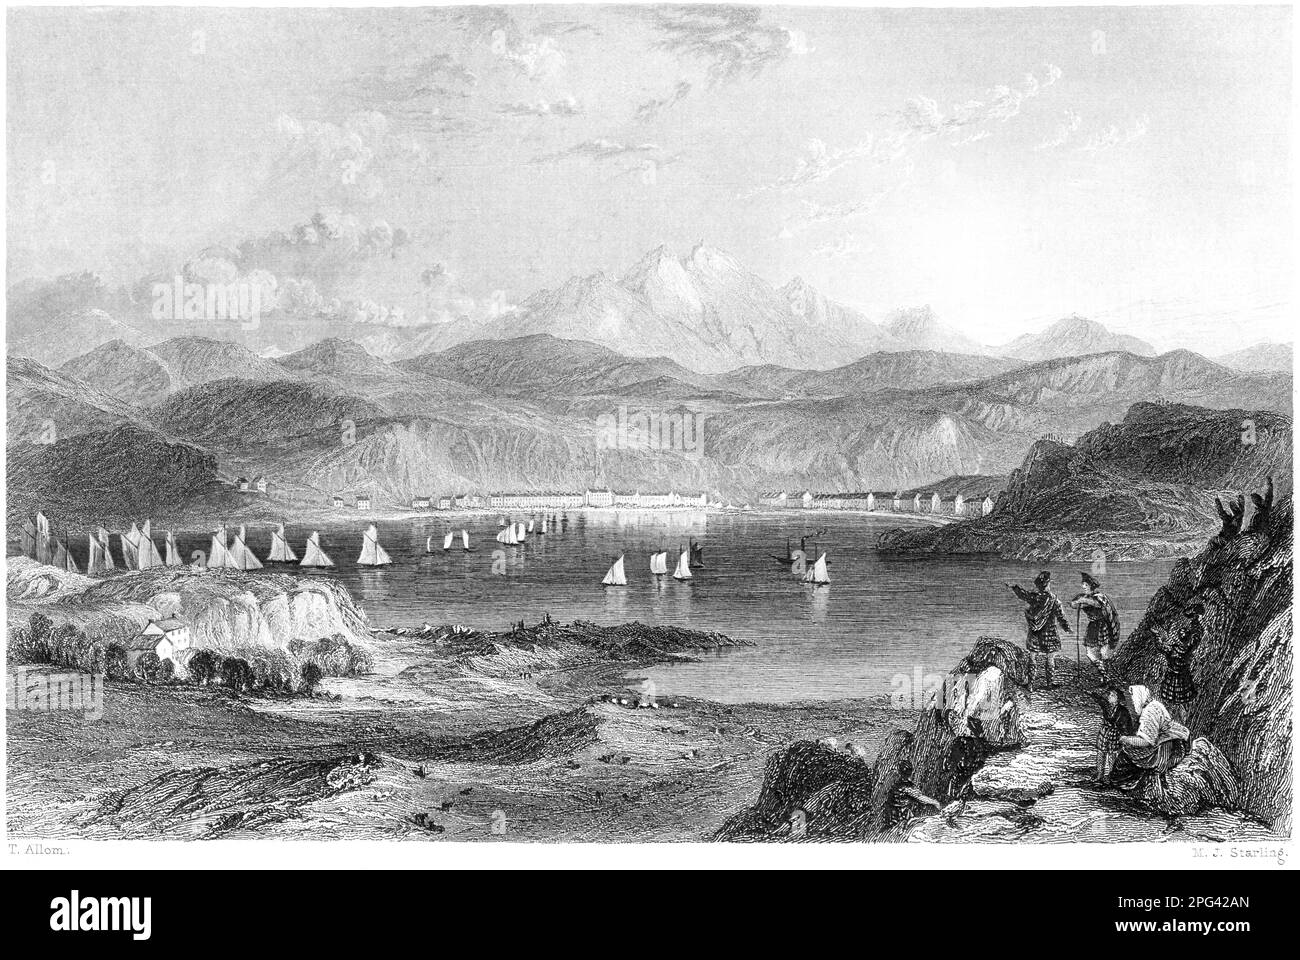 An engraving of Oban during the Regatta, Argyleshire, Scotland UK scanned at high resolution from a book printed in 1840. Believed copyright free. Stock Photo